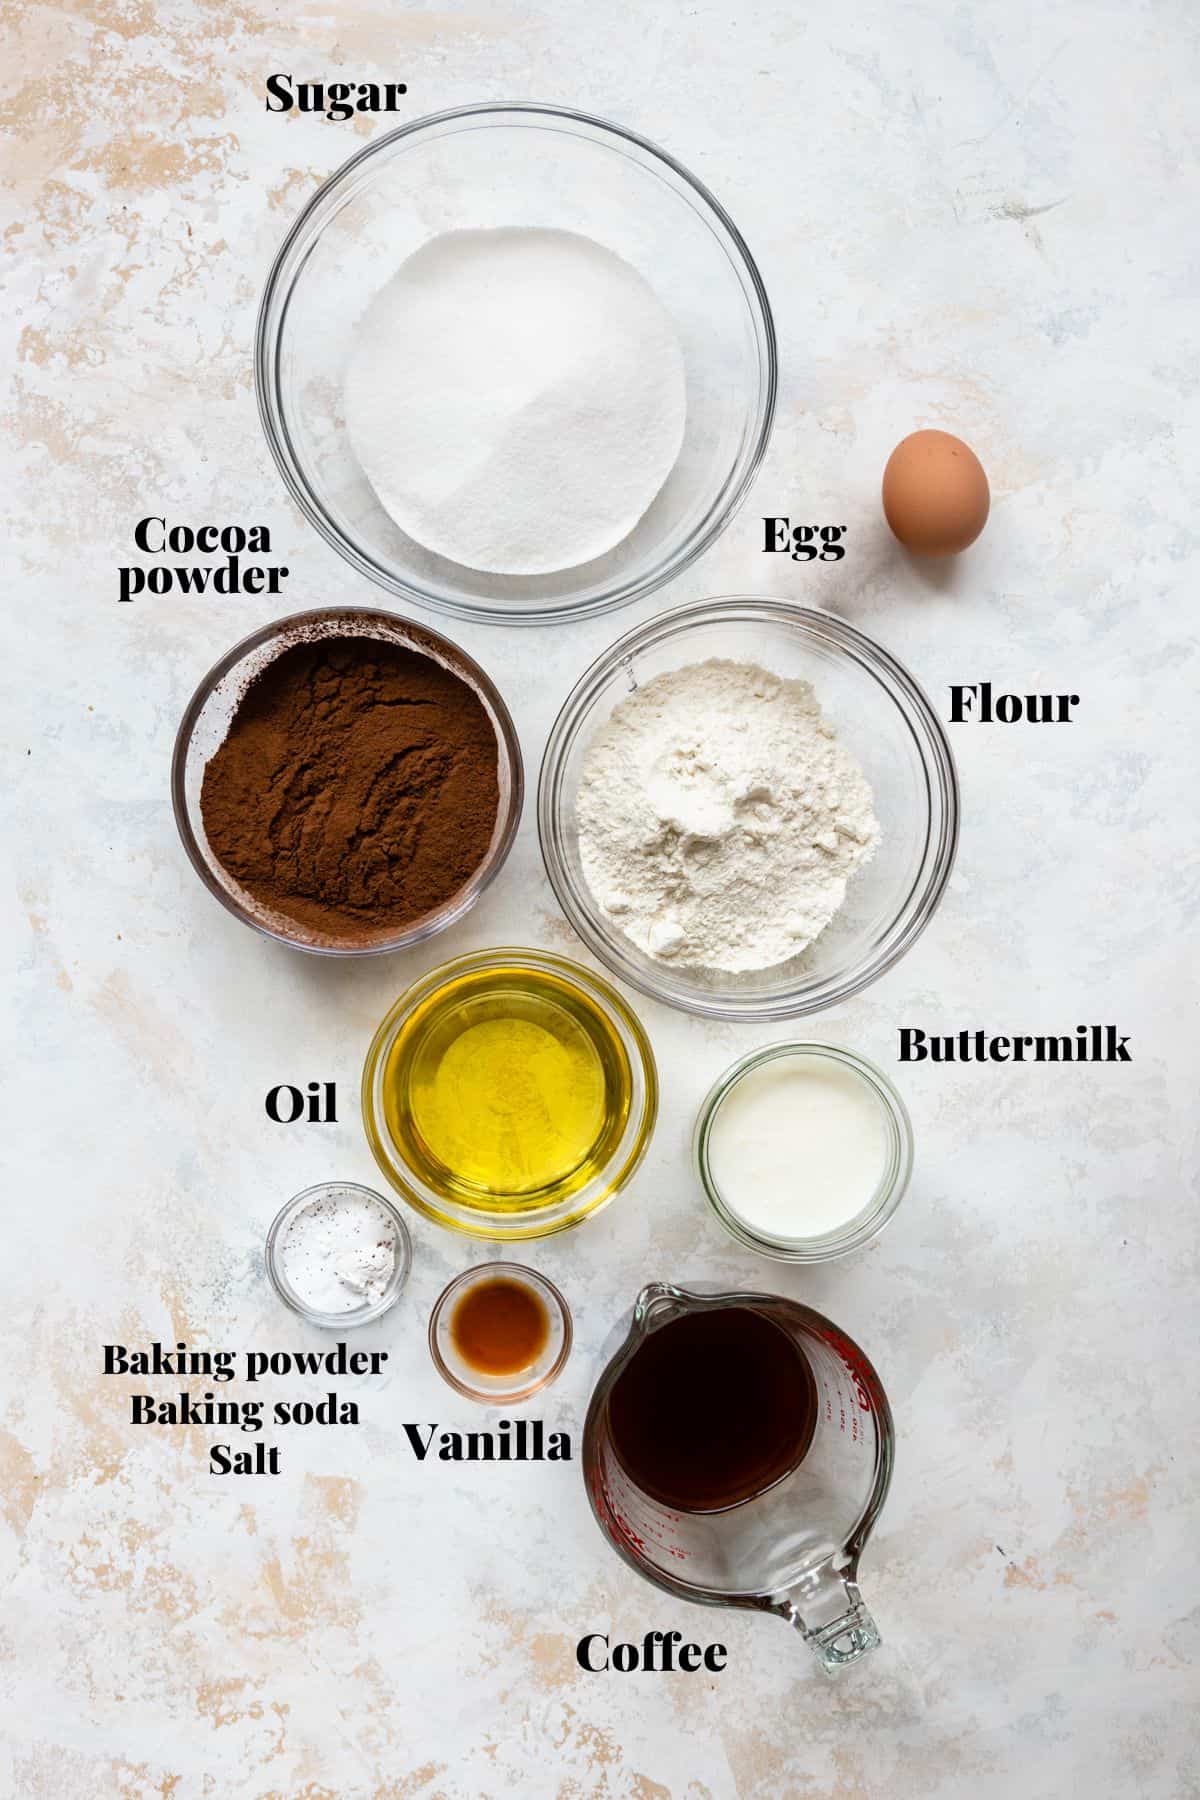 Ingredients to make small batch chocolate cupcakes.